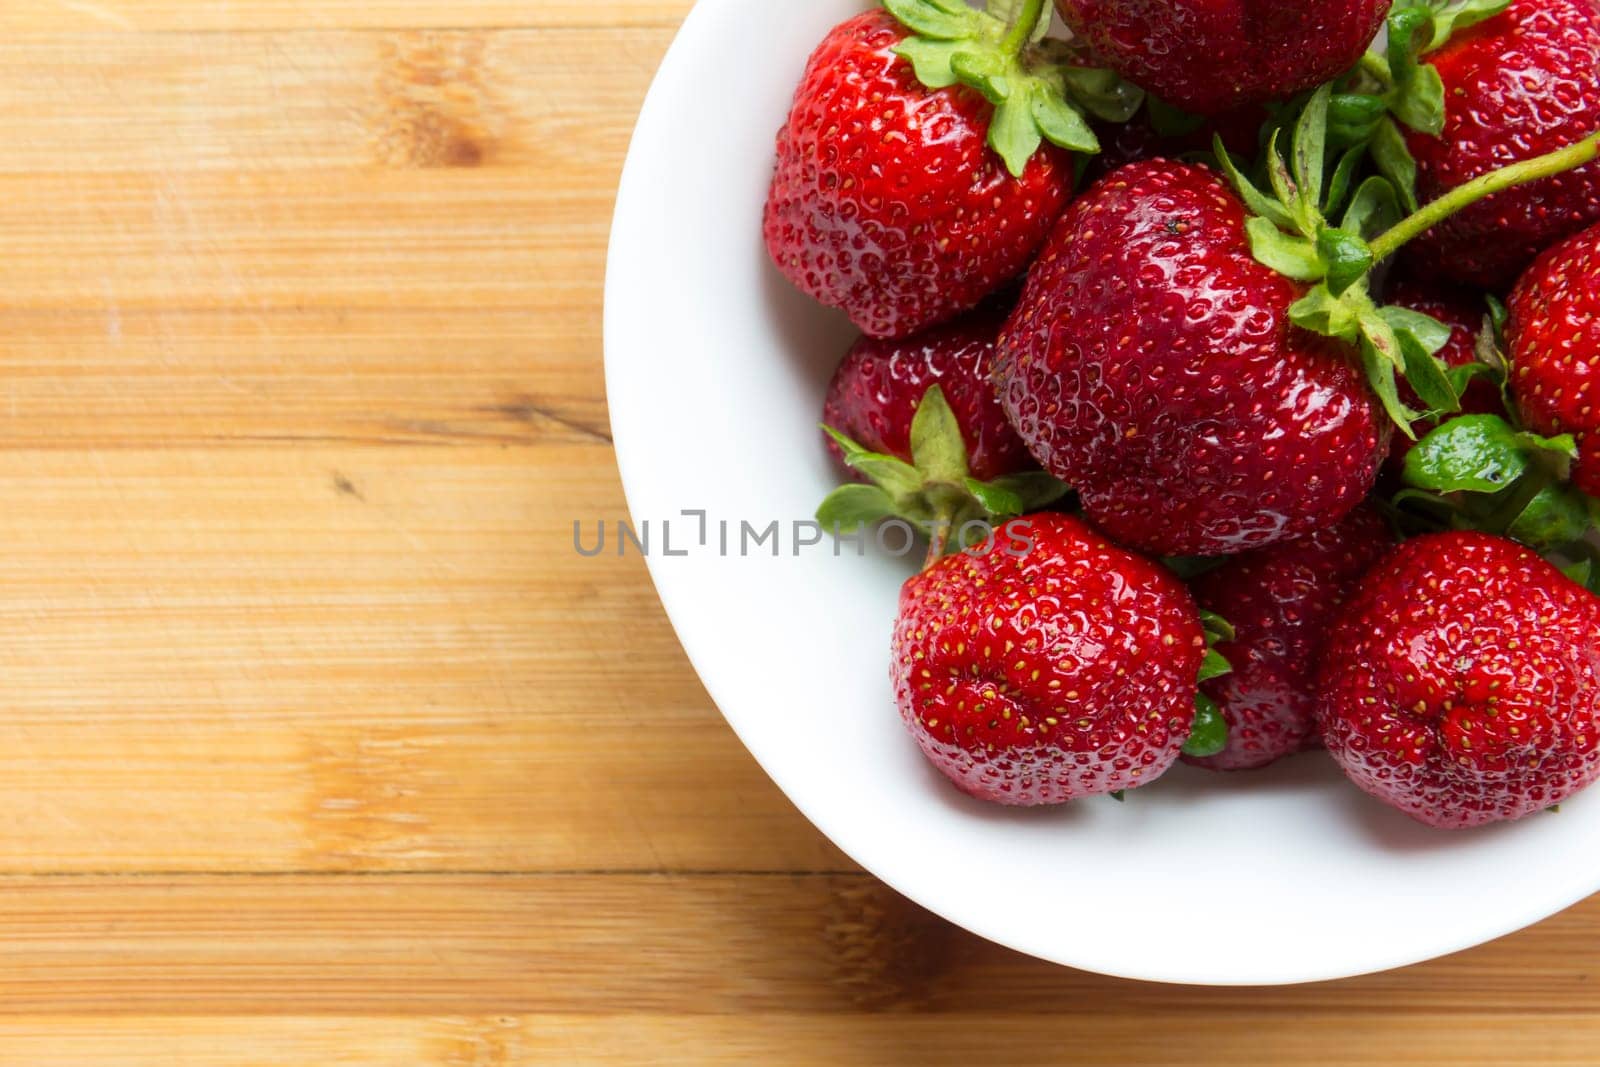 Large, red strawberries lie in a white plate on a wooden surface